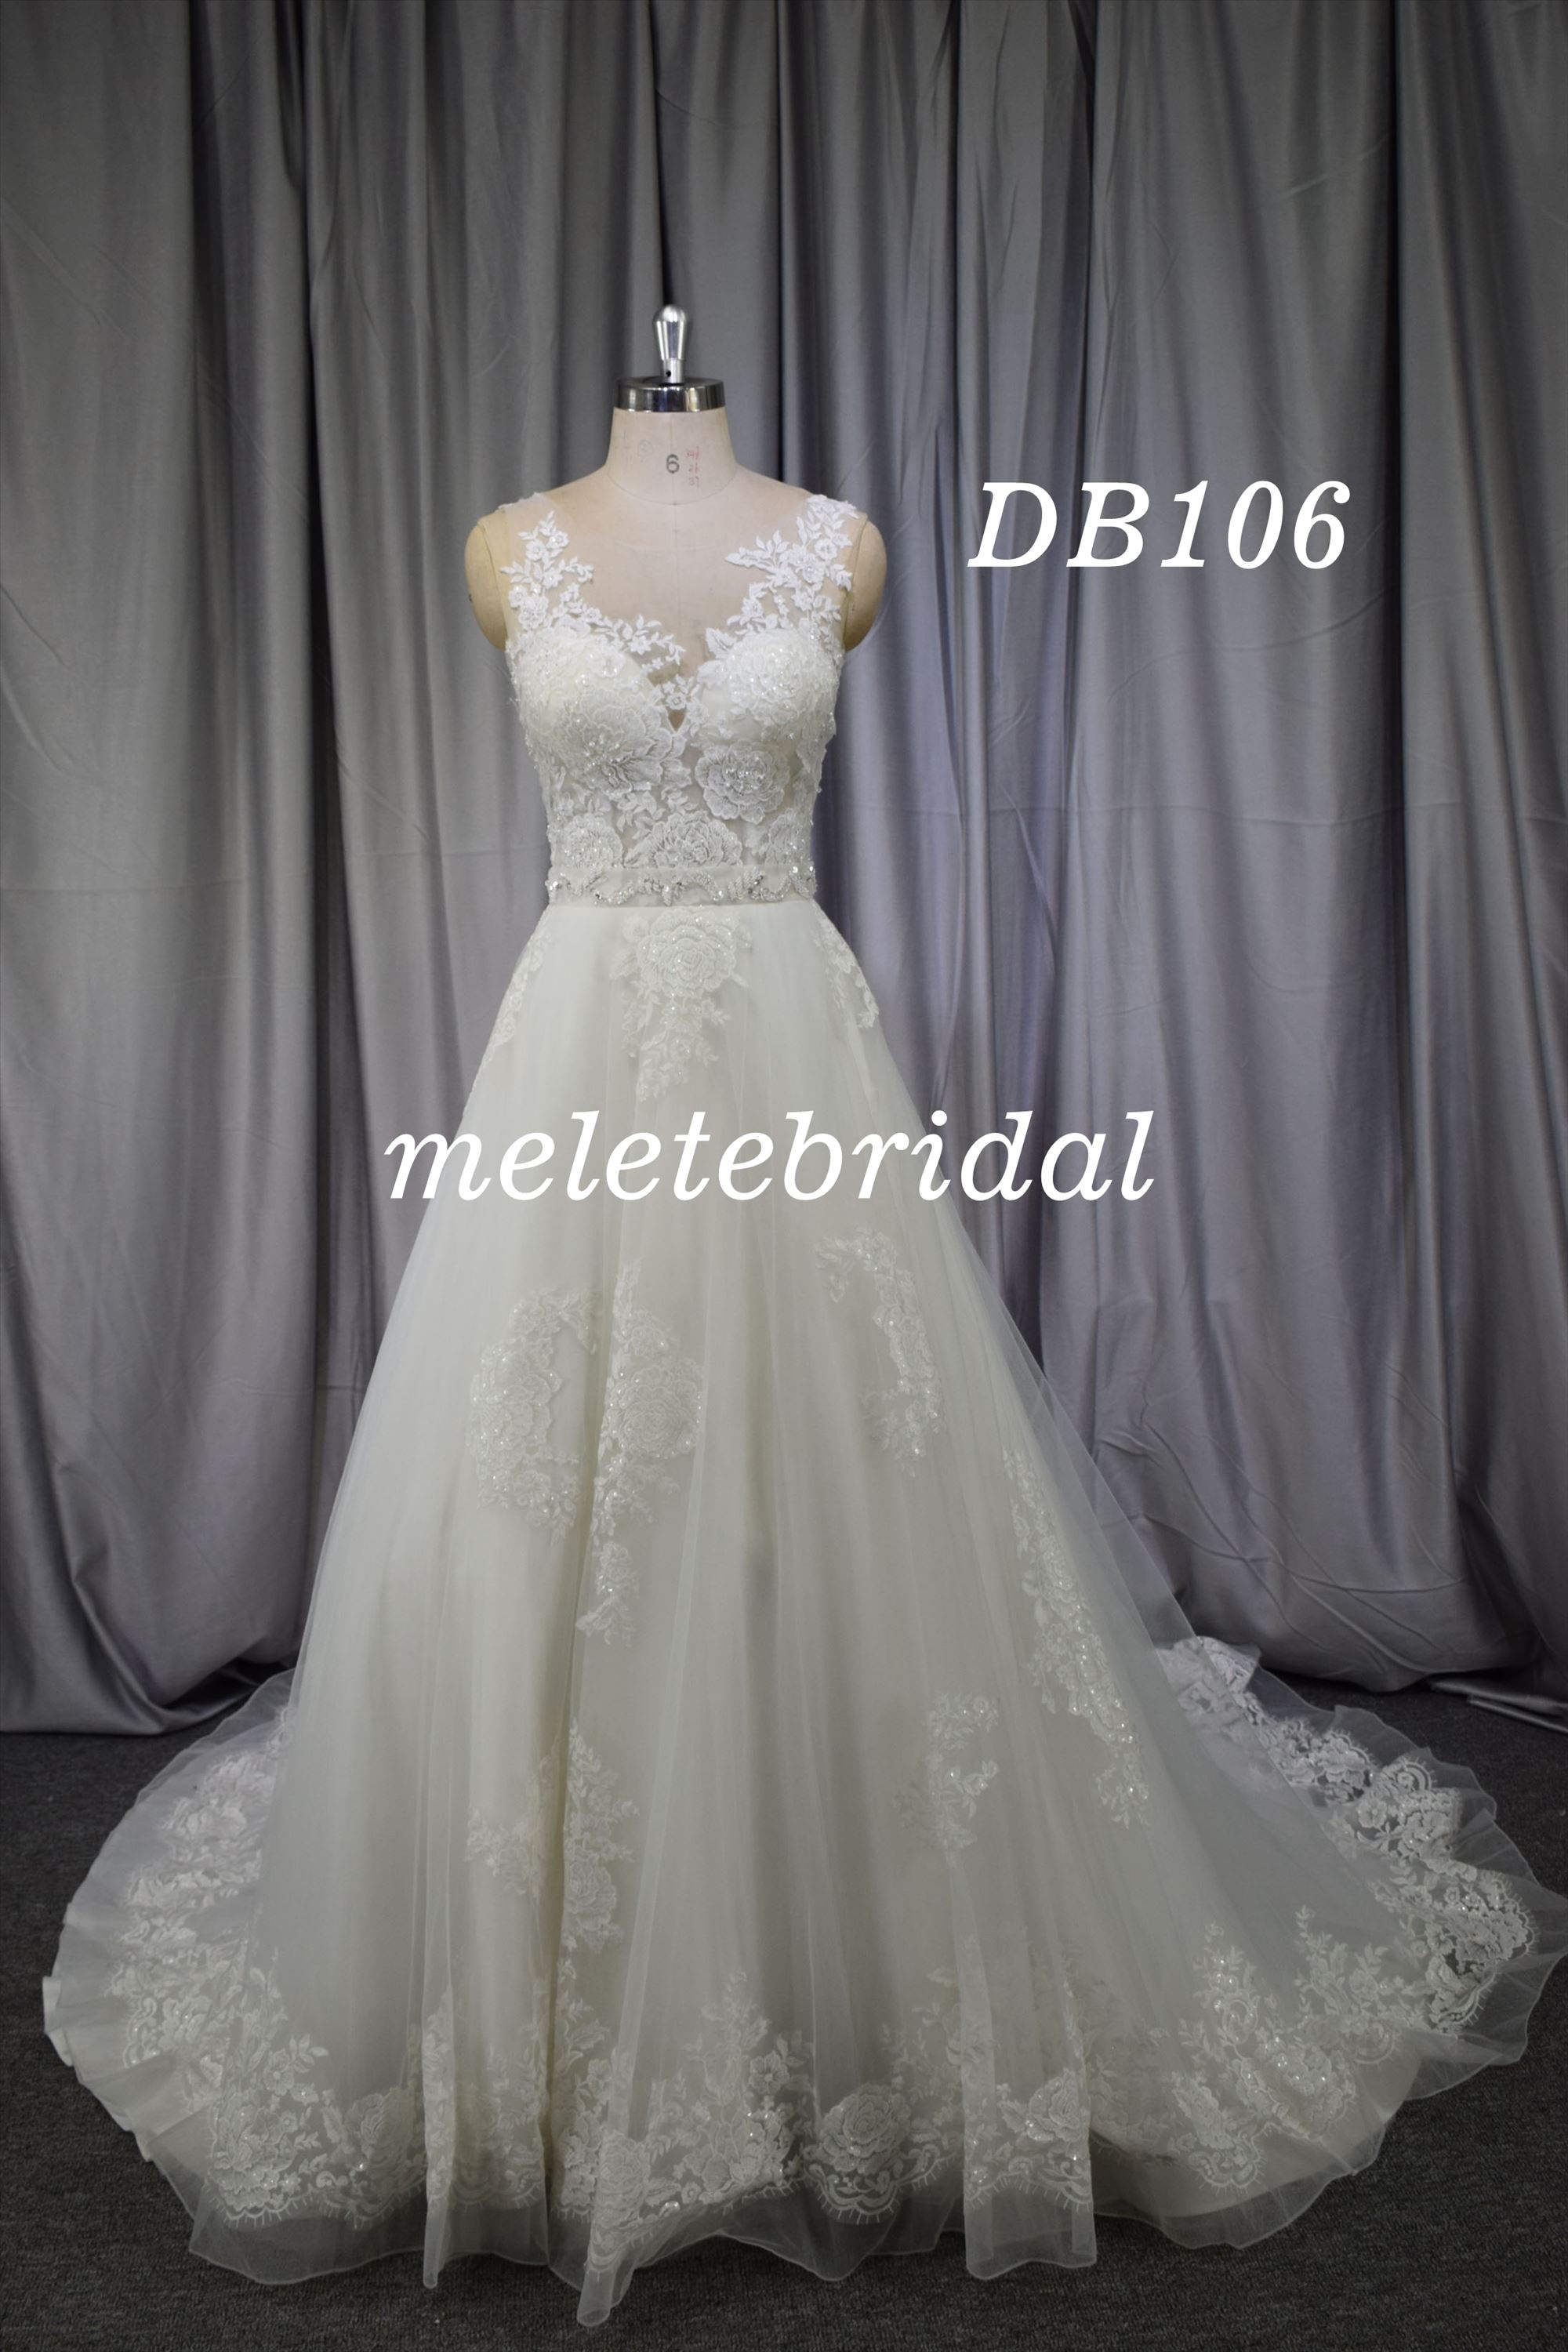 New arrival wedding dress with sweep train zipper back